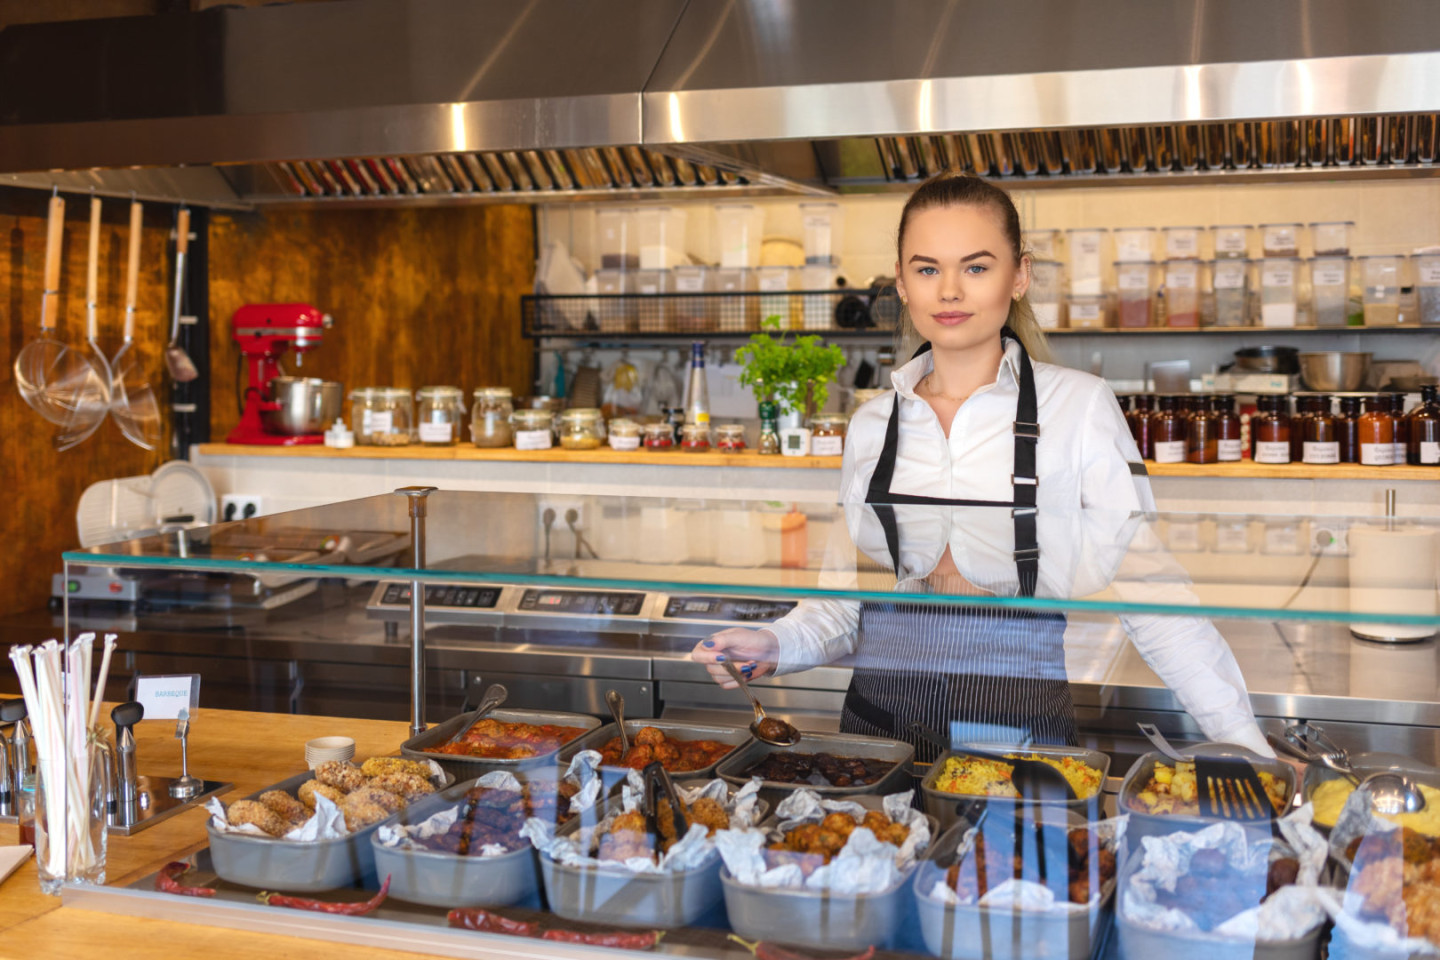 New business owner or woman waitress working behind counter in small restaurant serving food